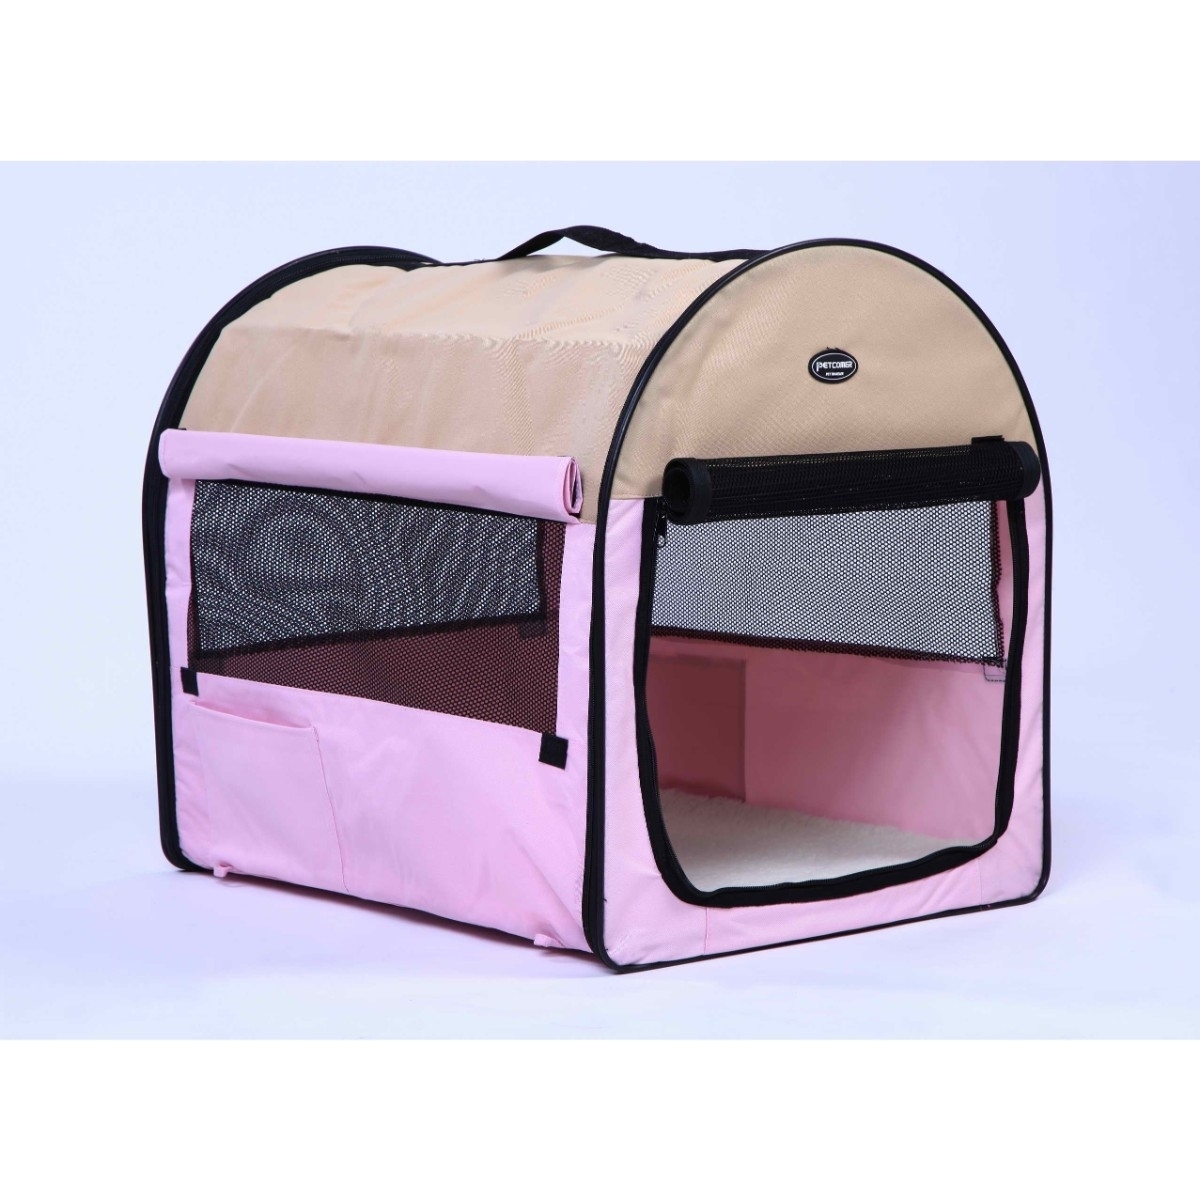 MKF Collection By Mia K. Handbag Doggy Boo Fashionable Bicycle Pet Carrier - Pink Beige L